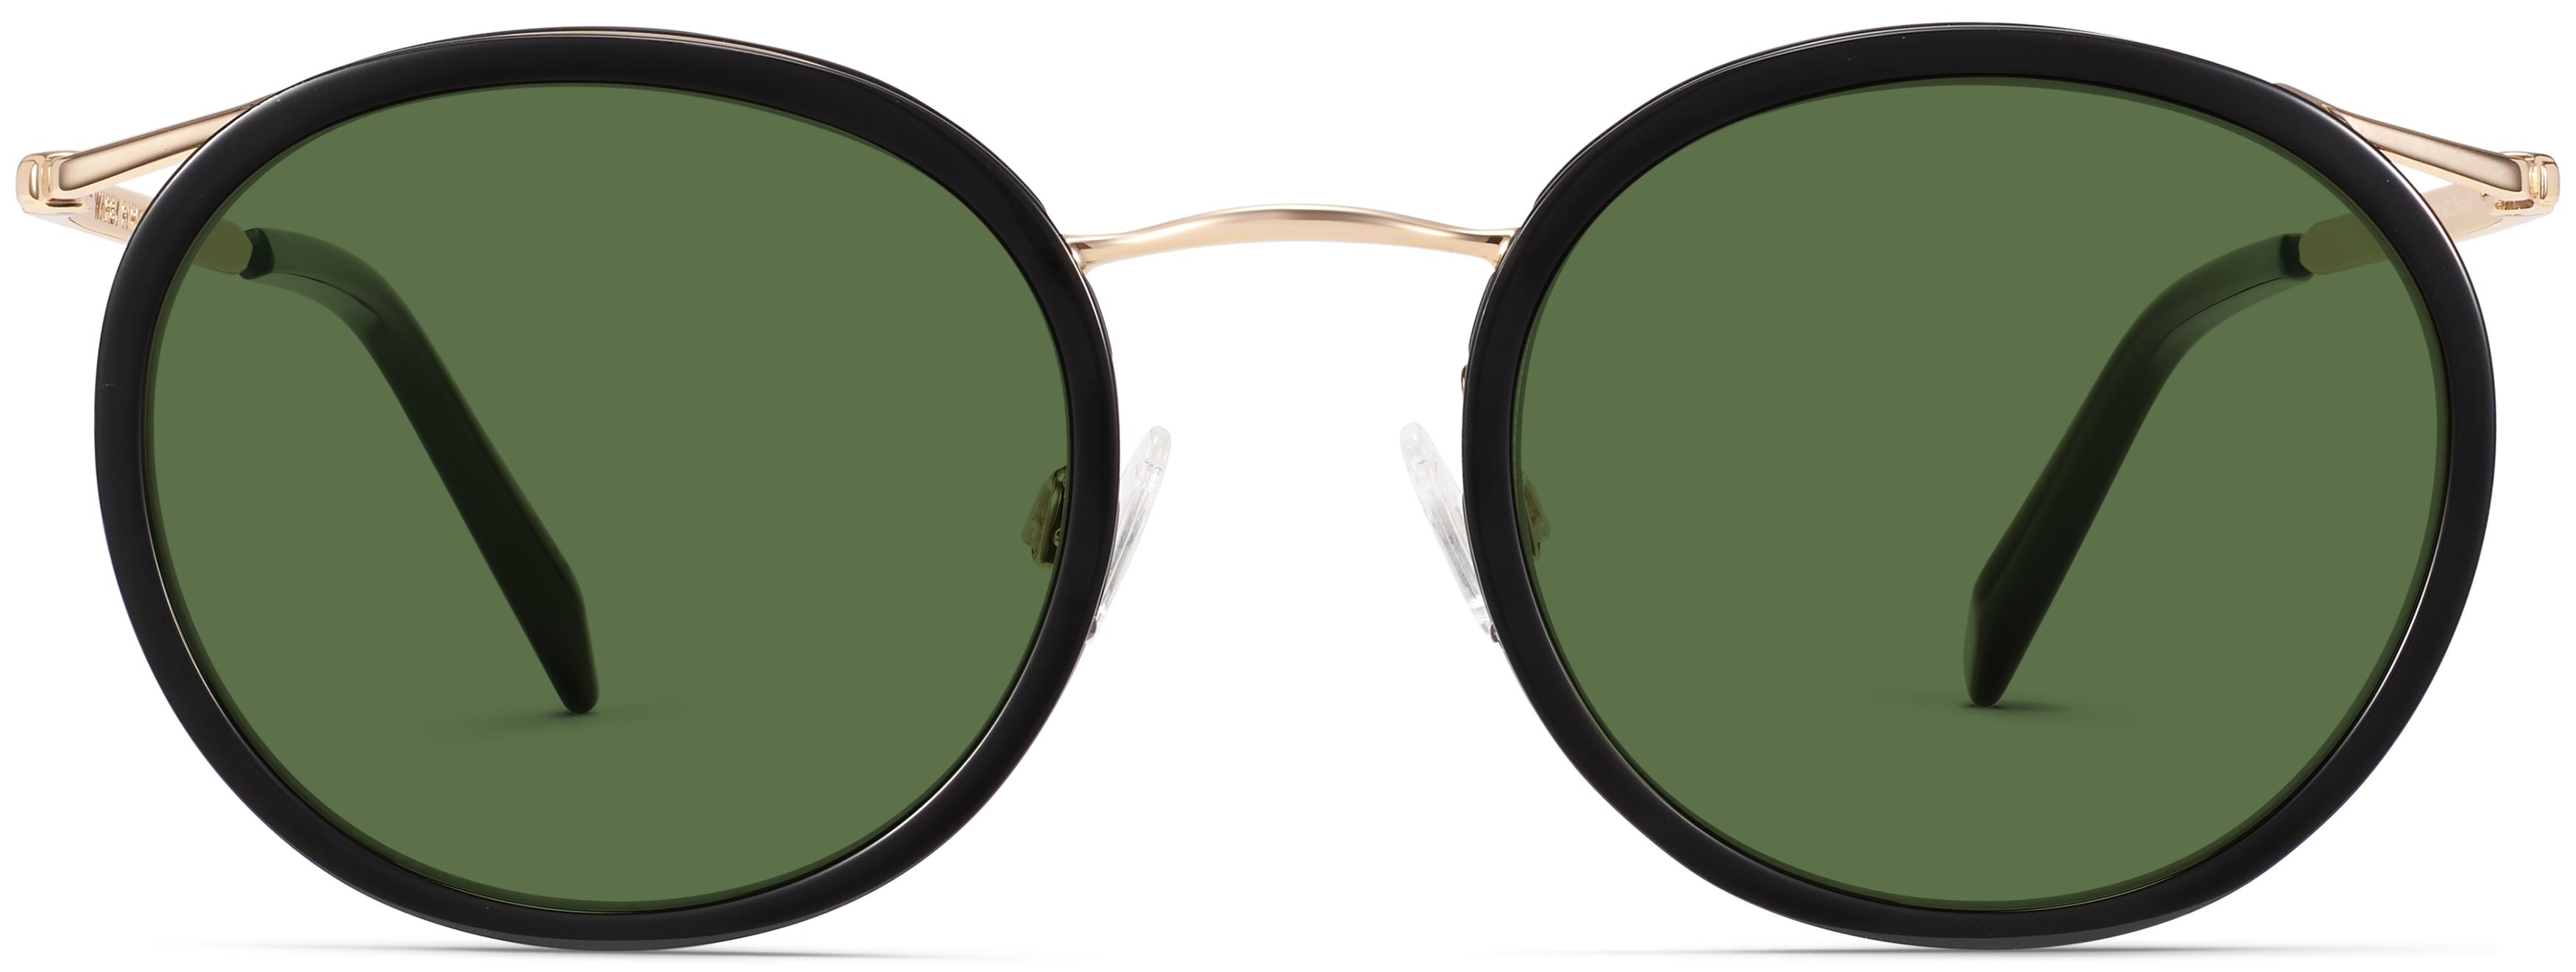 Baird Sunglasses in Jet Black with Polished Gold